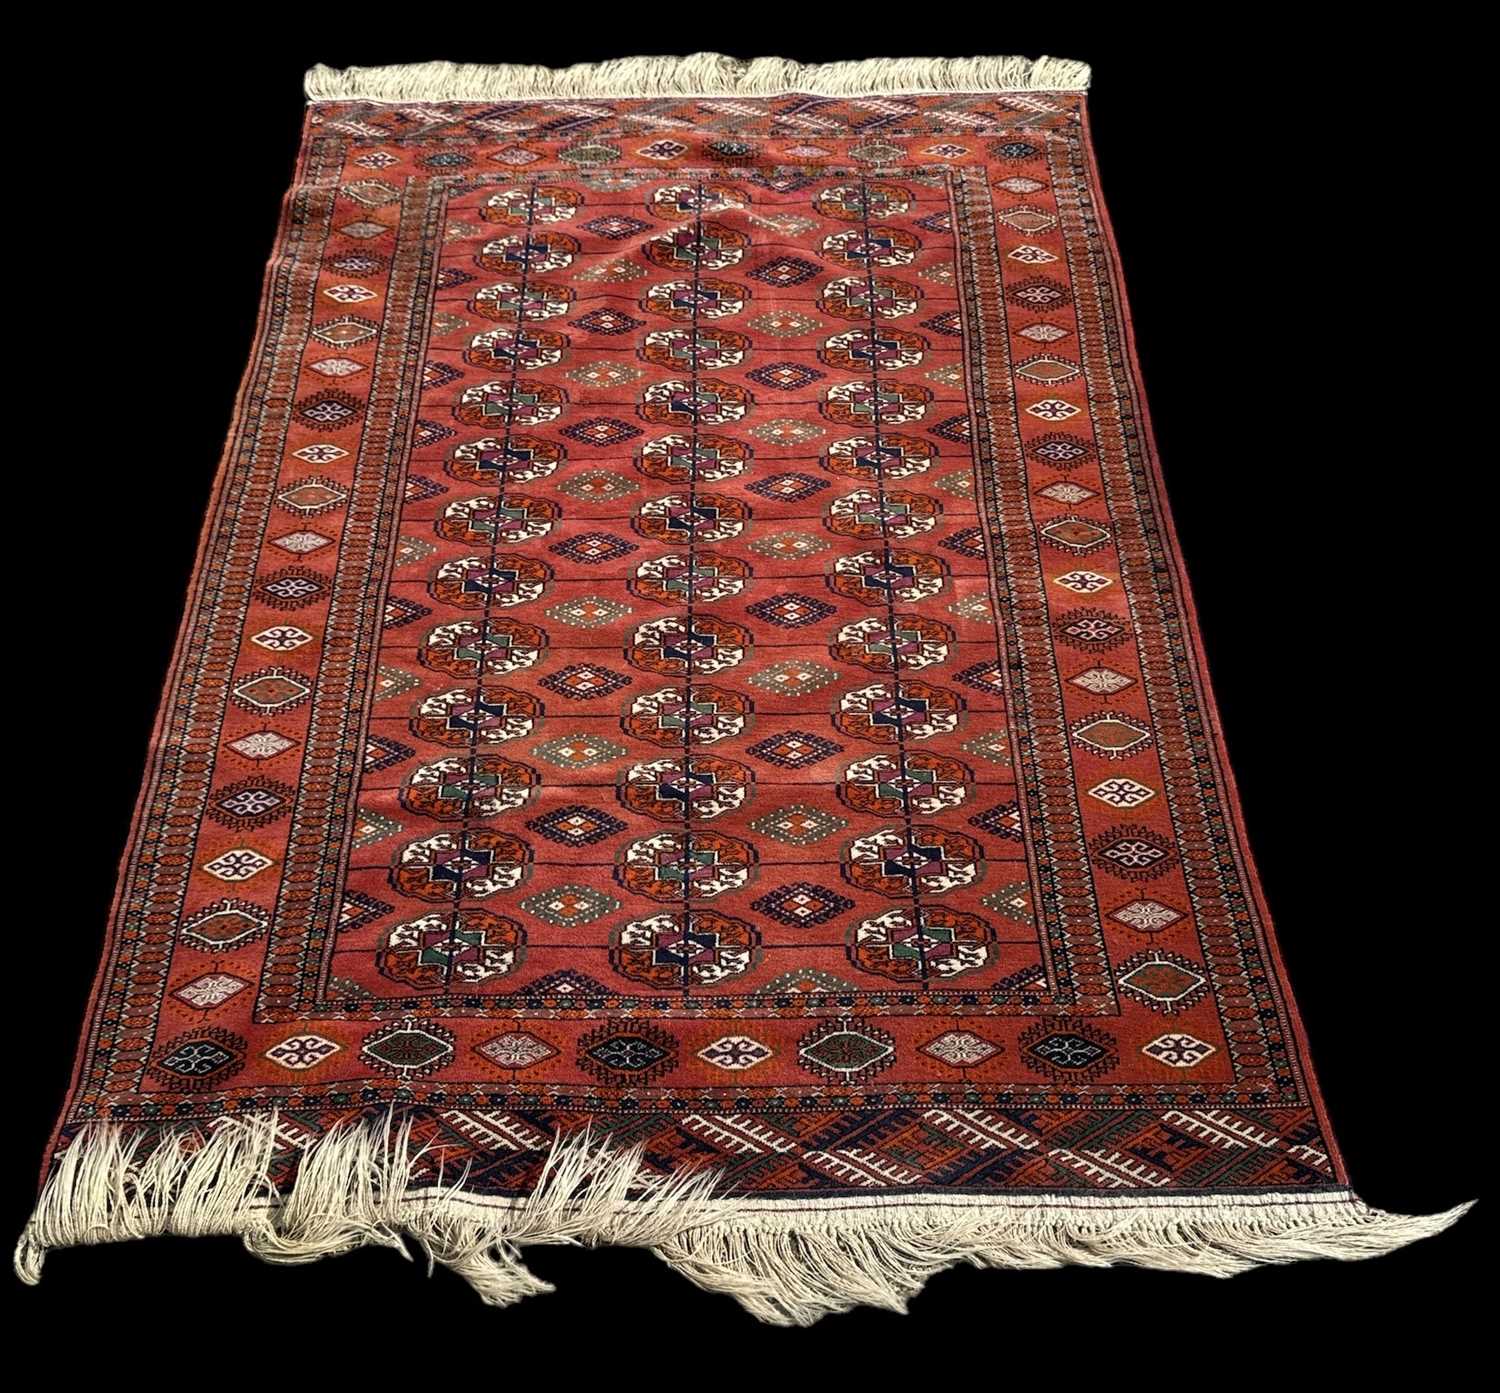 A modern red ground Persian style carpet with geometric design, 196 x 129cm.